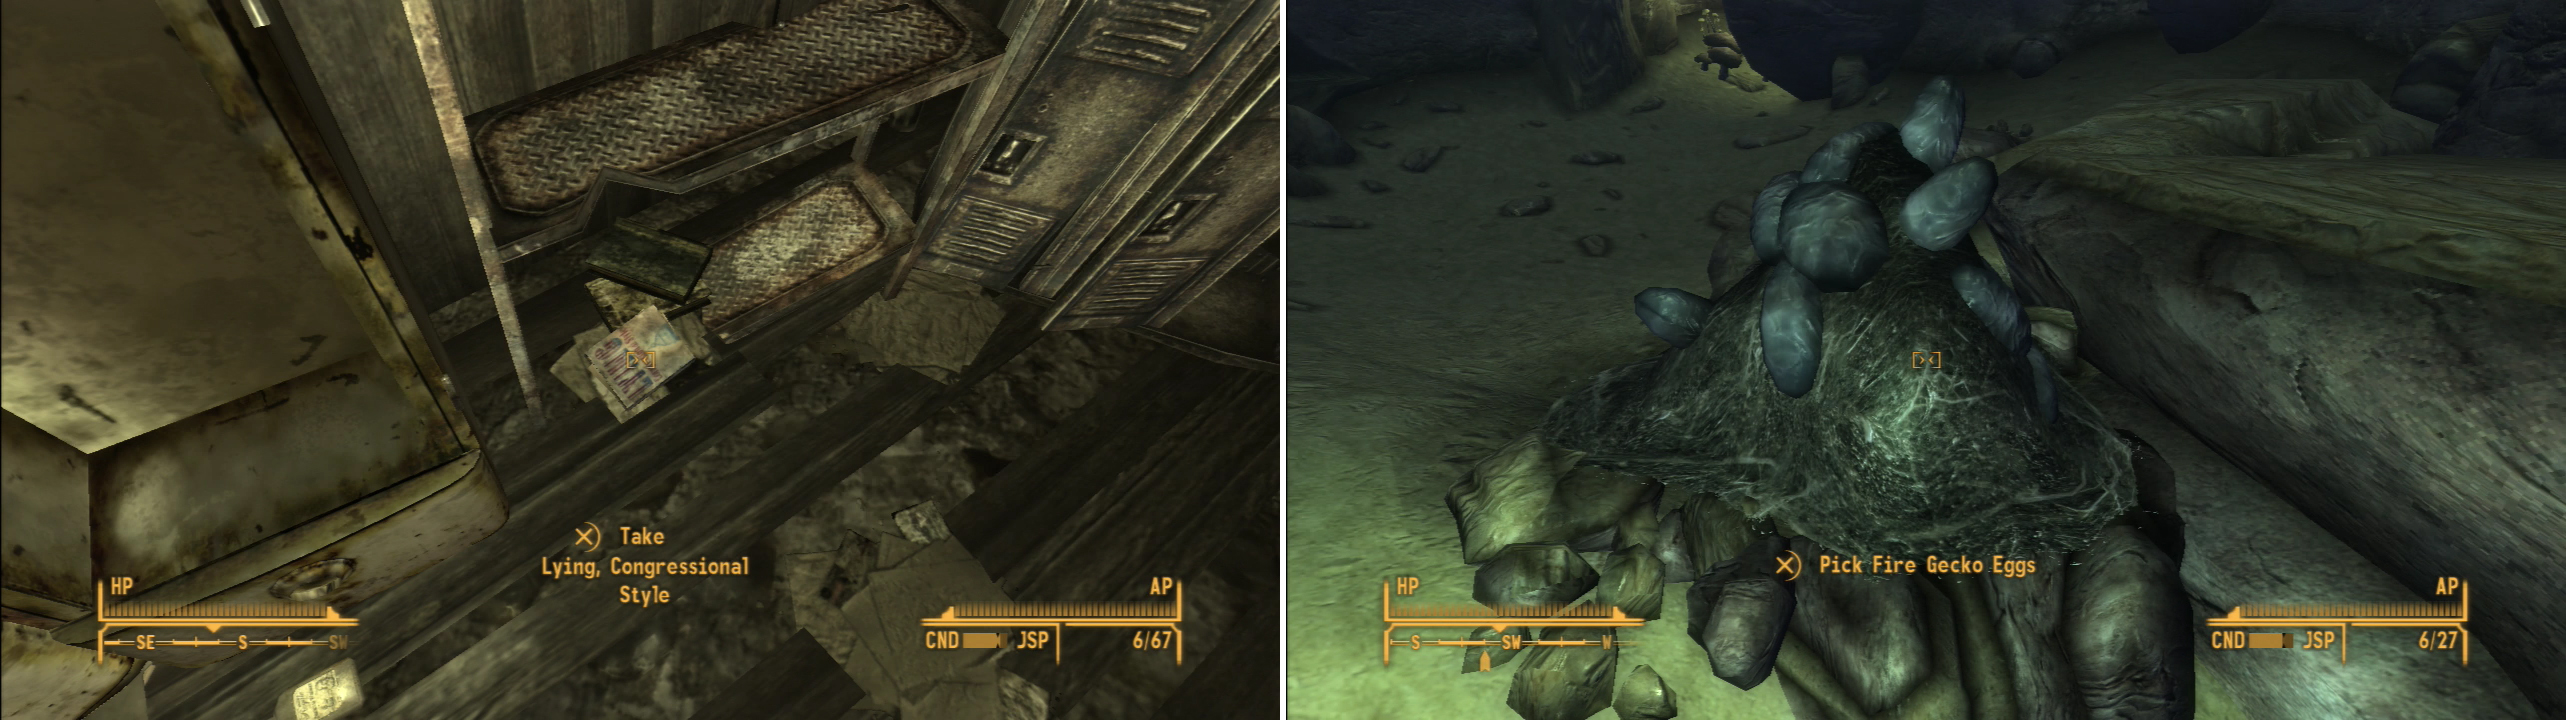 Grab the copy of Lying, Congressional Style from within the Lucky Jim Mine House (left). Within the Fire Gecko-infested Bootjack Cavern you’ll find some Fire Gecko Eggs (right).